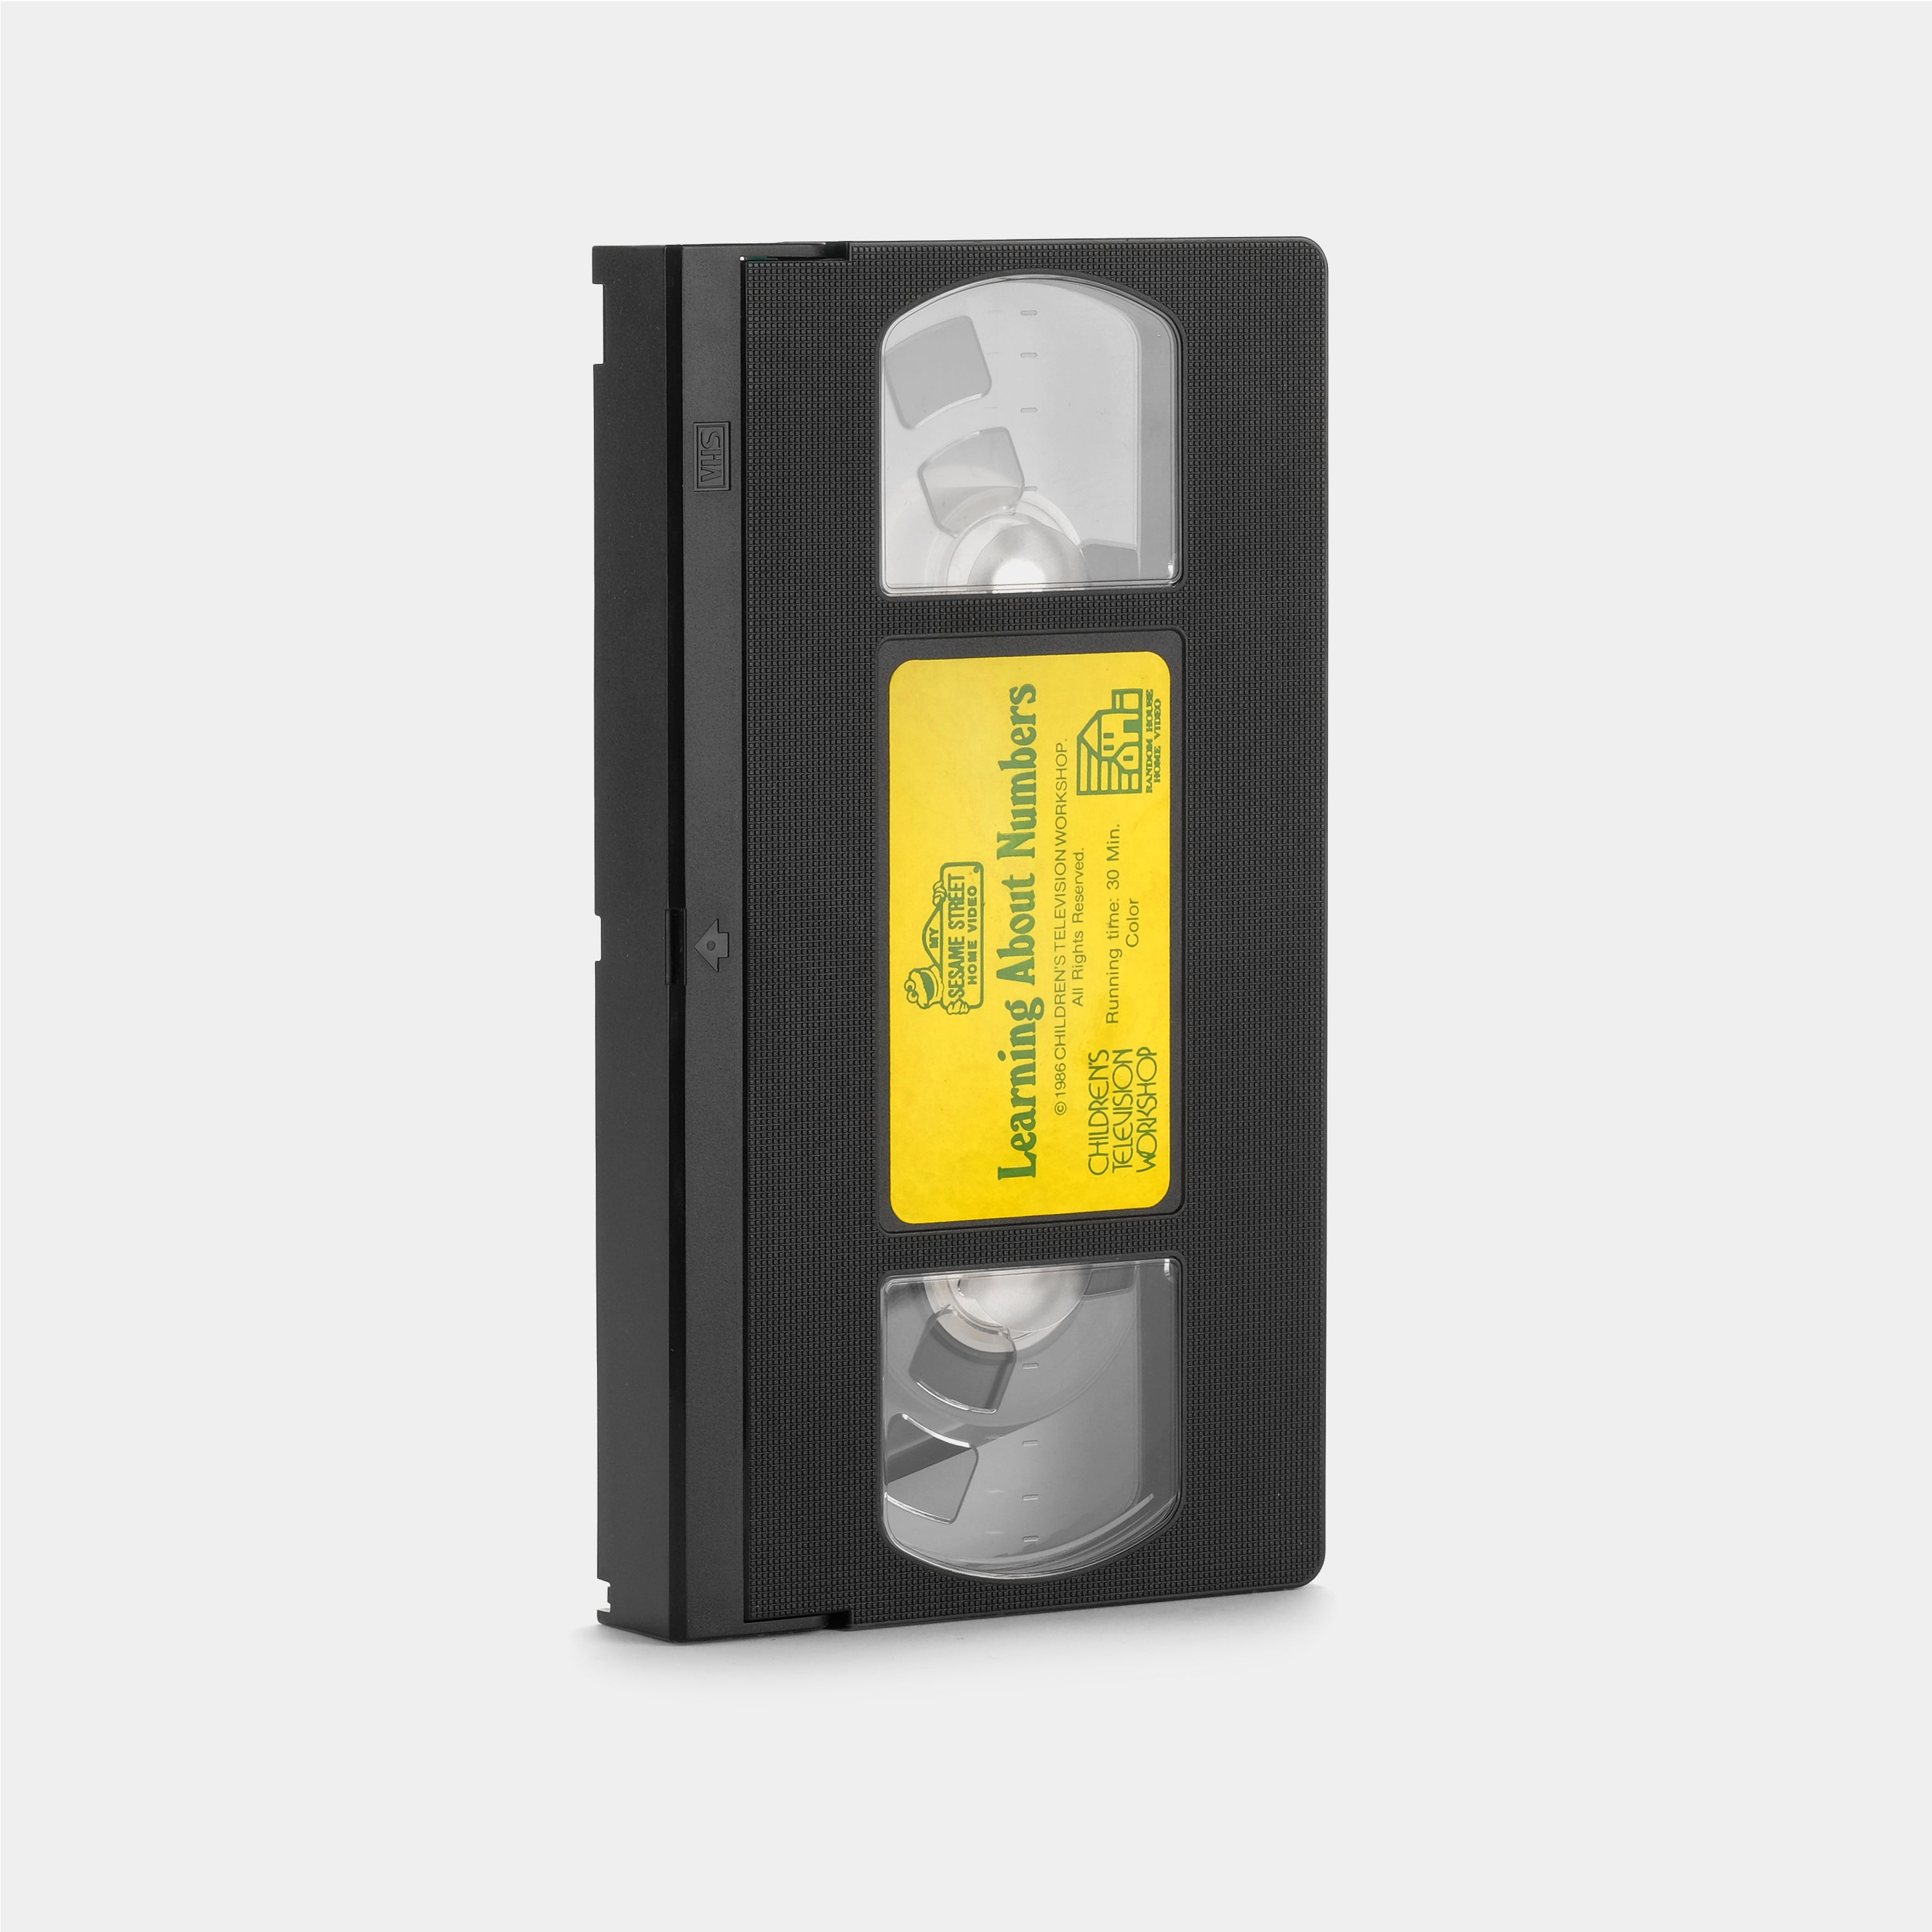 Sesame Street: Learning About Numbers VHS Tape